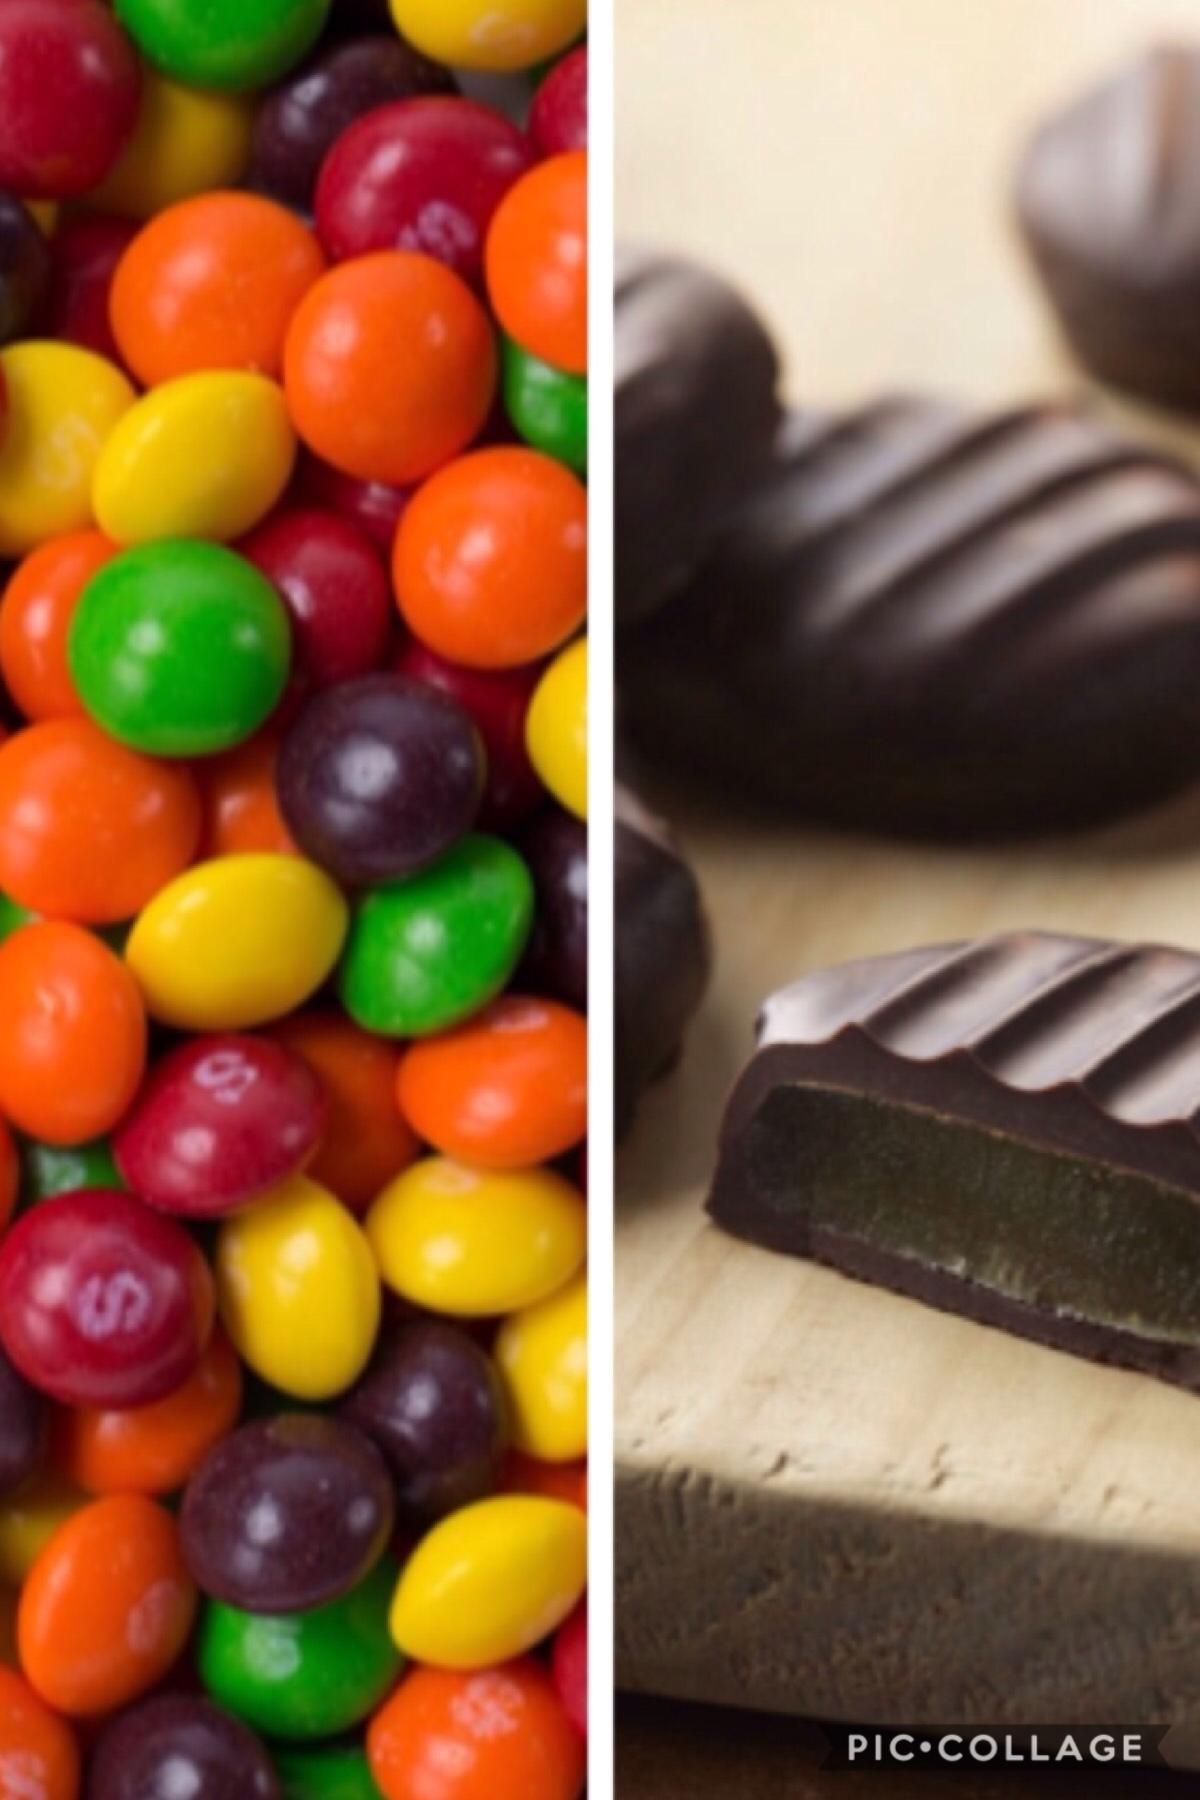 Candy or chocolate?